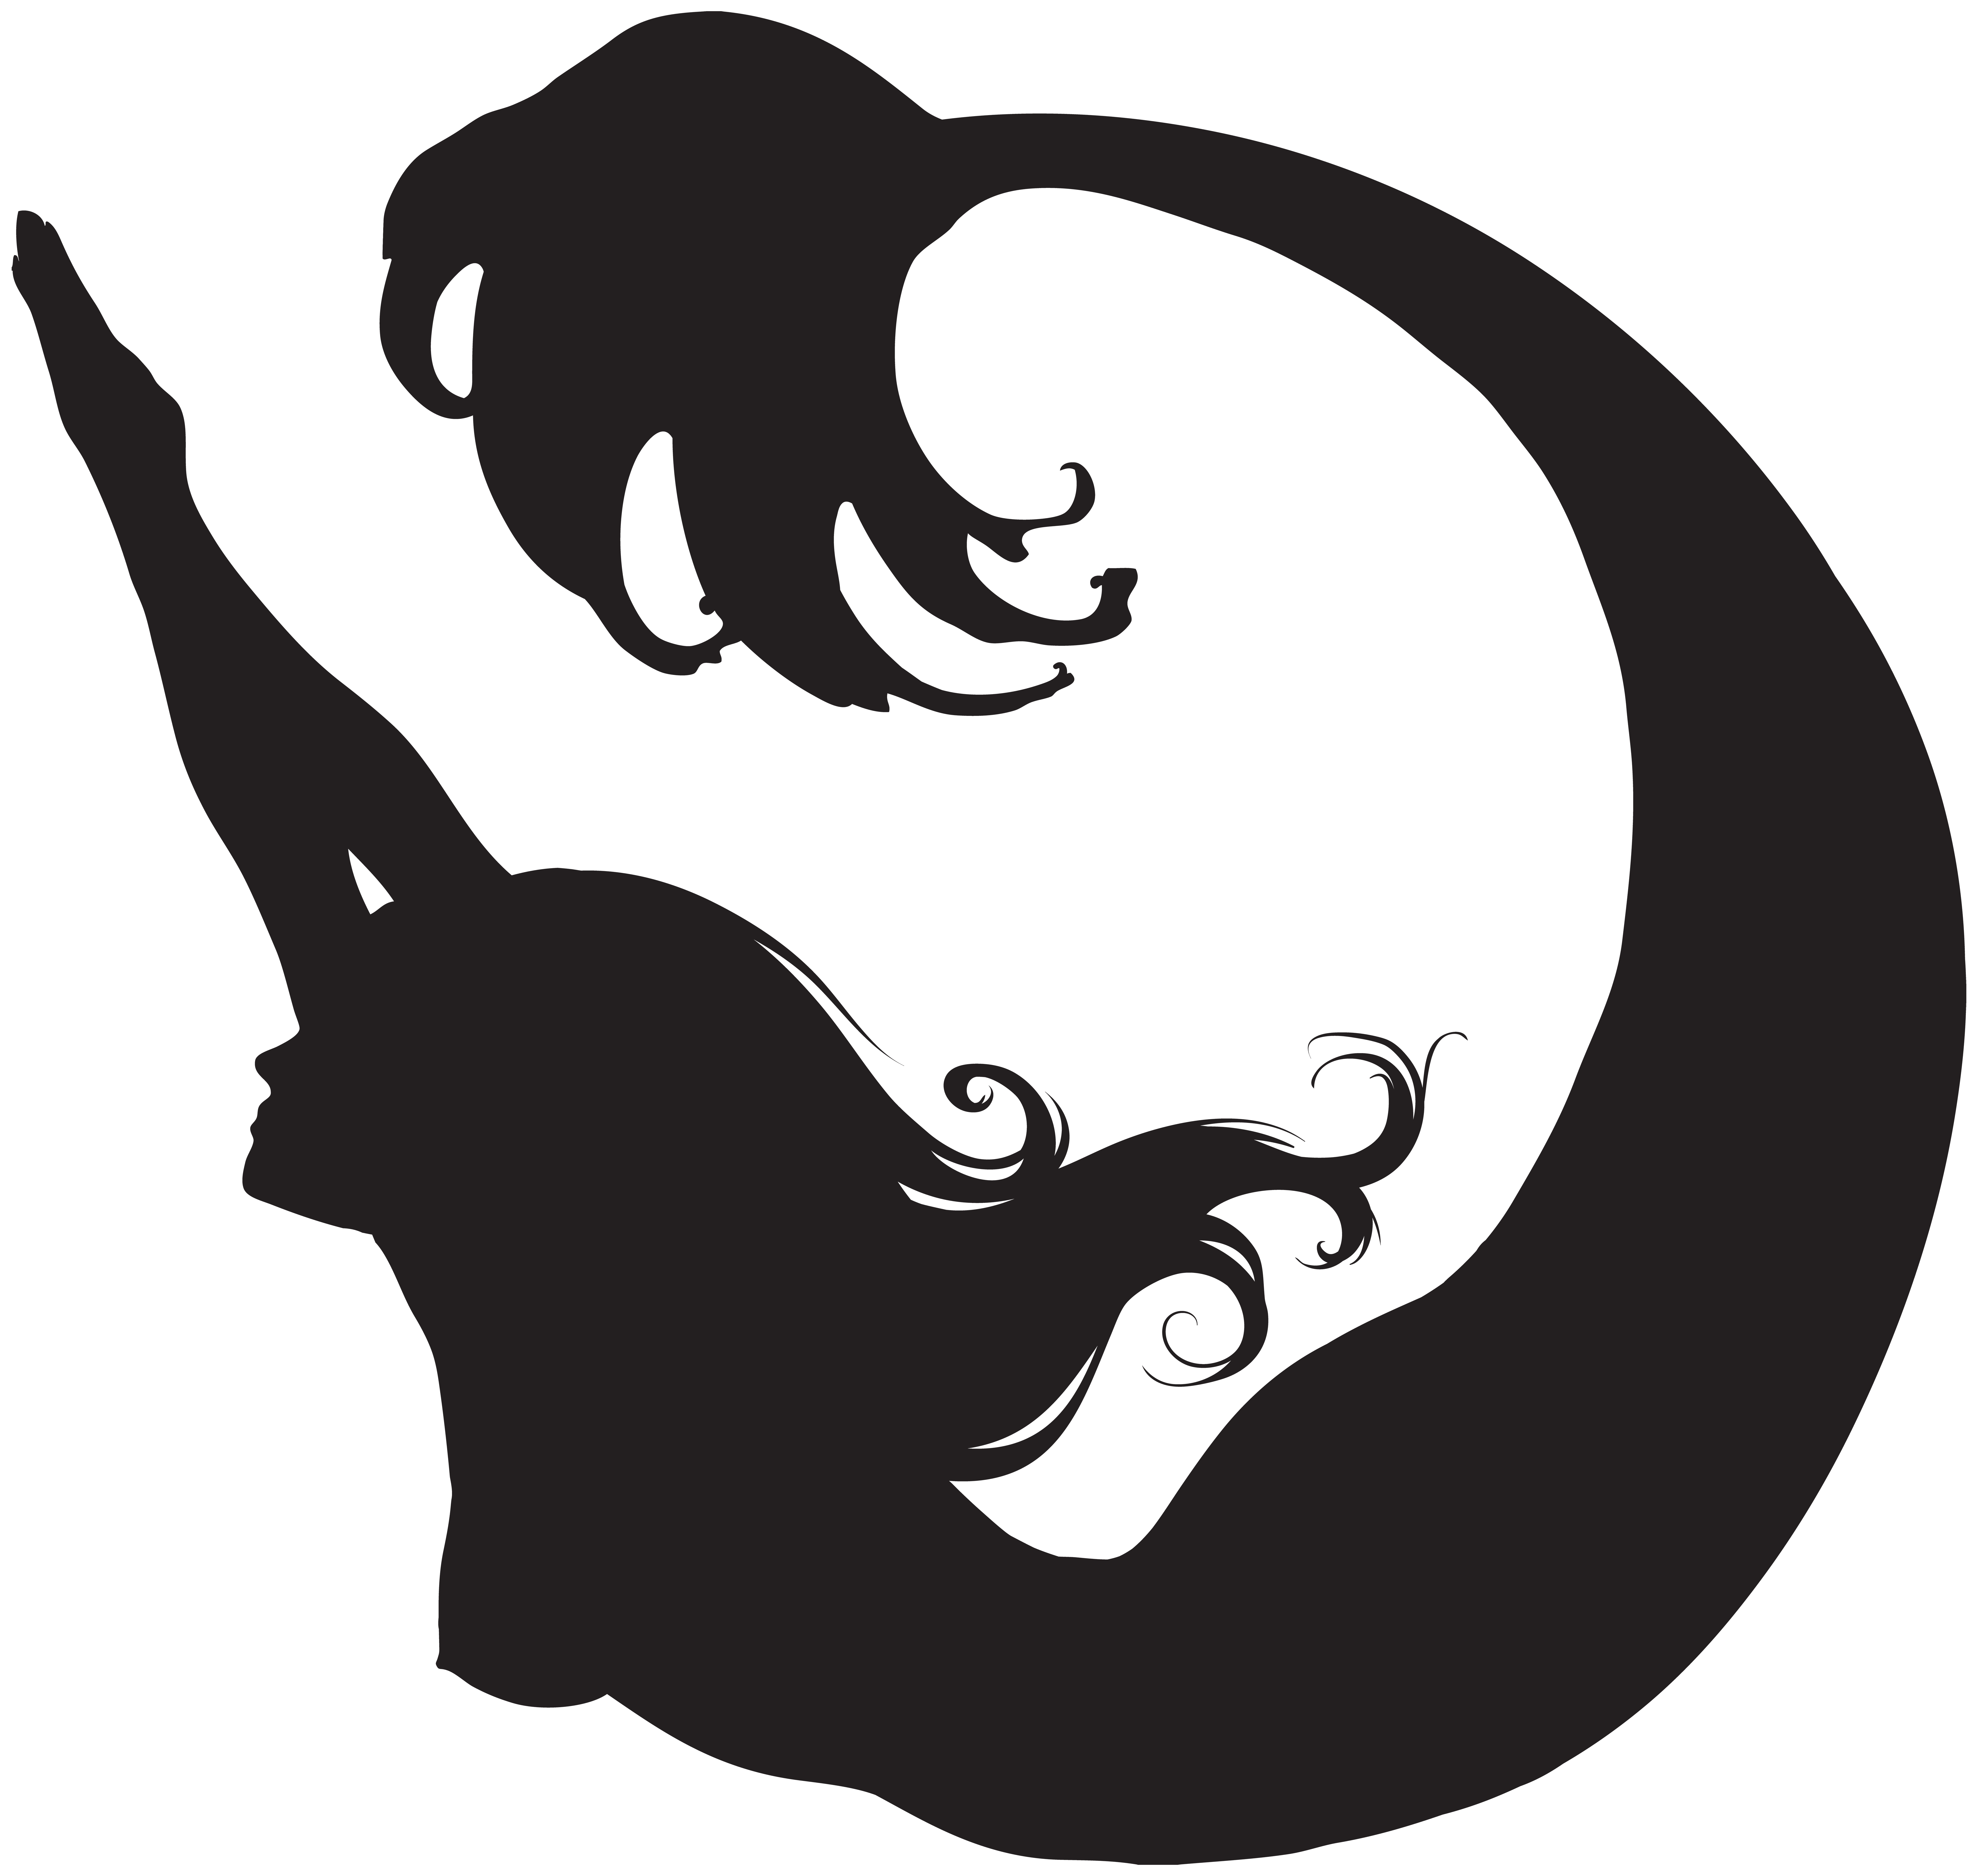 Mermaid clipart file. Swimming silhouette png clip